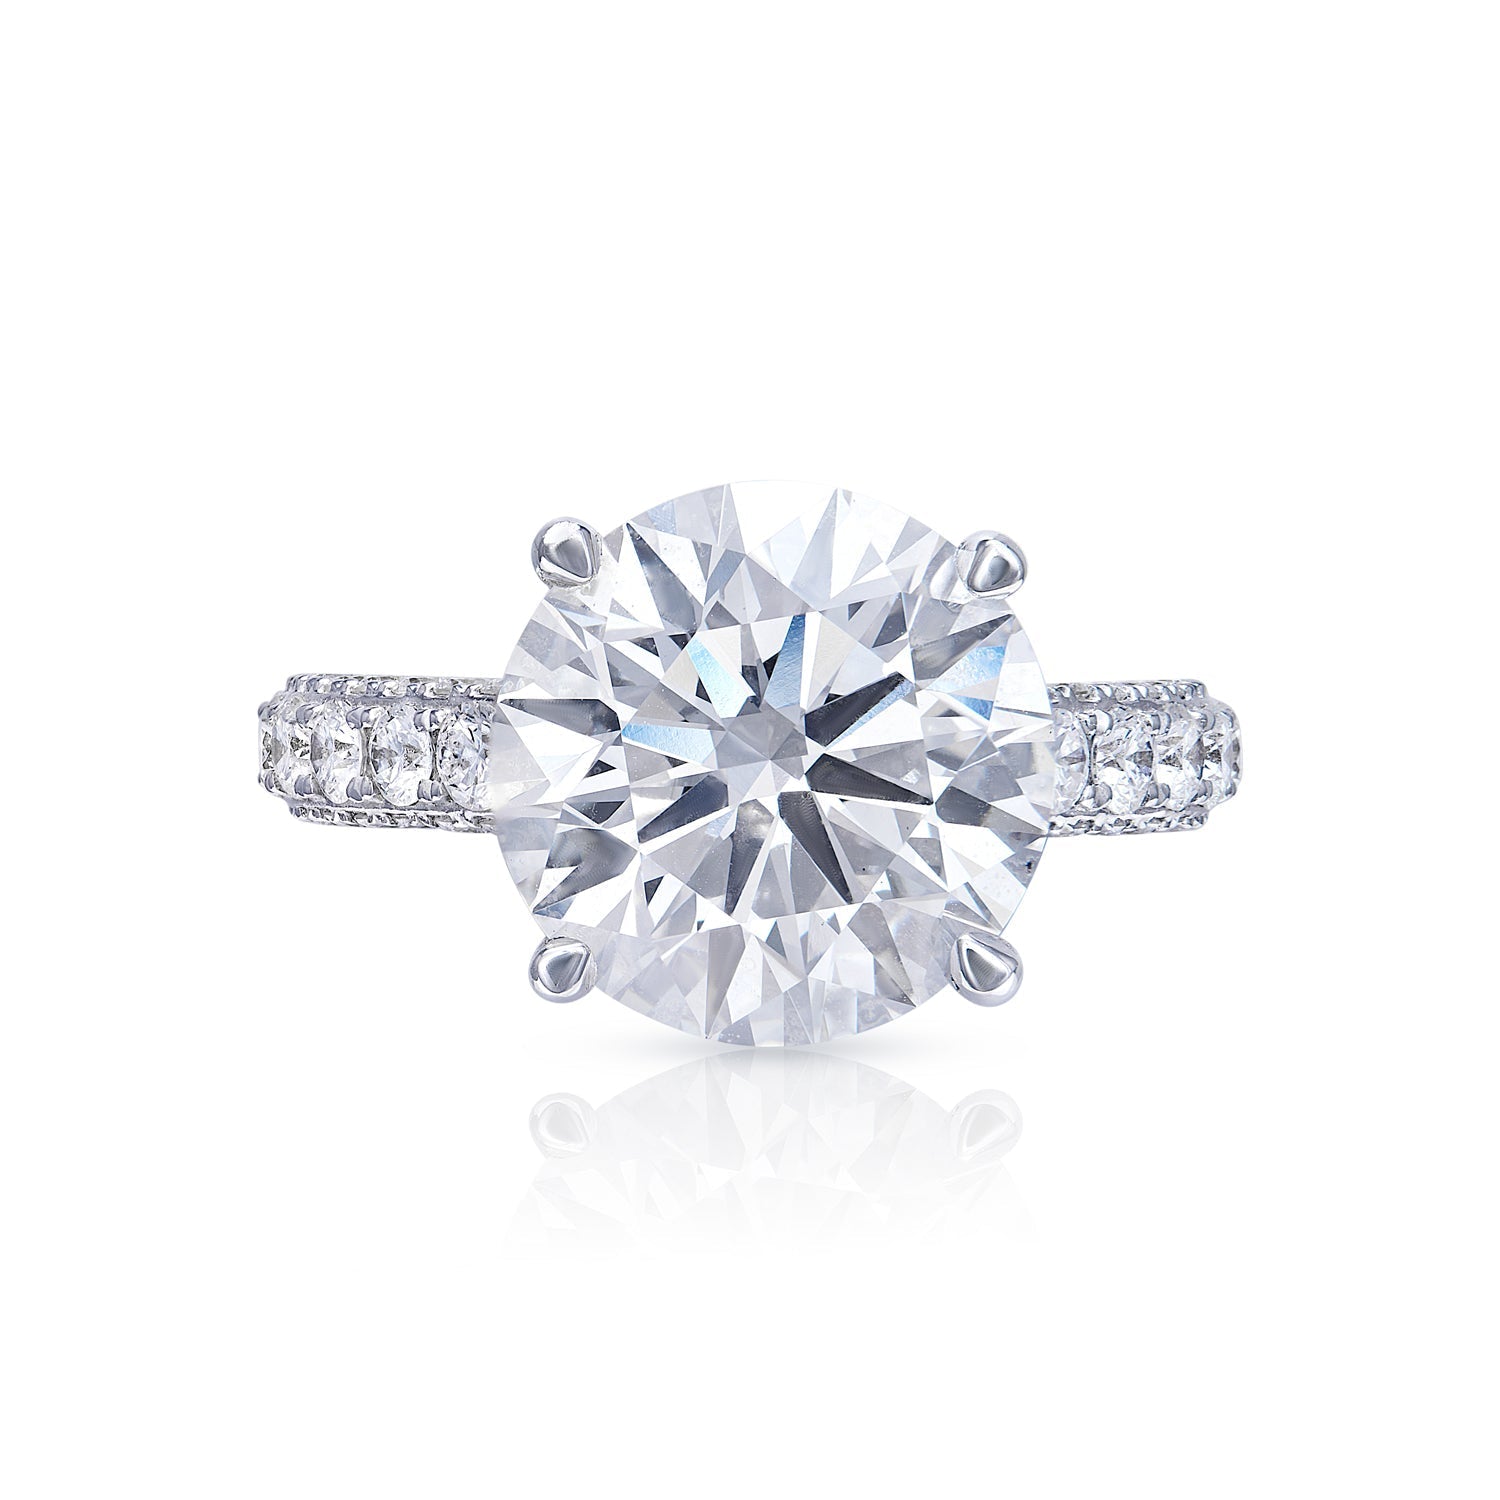 Lee 8 Carats G VS1 Round Cut Lab-Grown Diamond Engagement Ring in 18k White Gold Front View